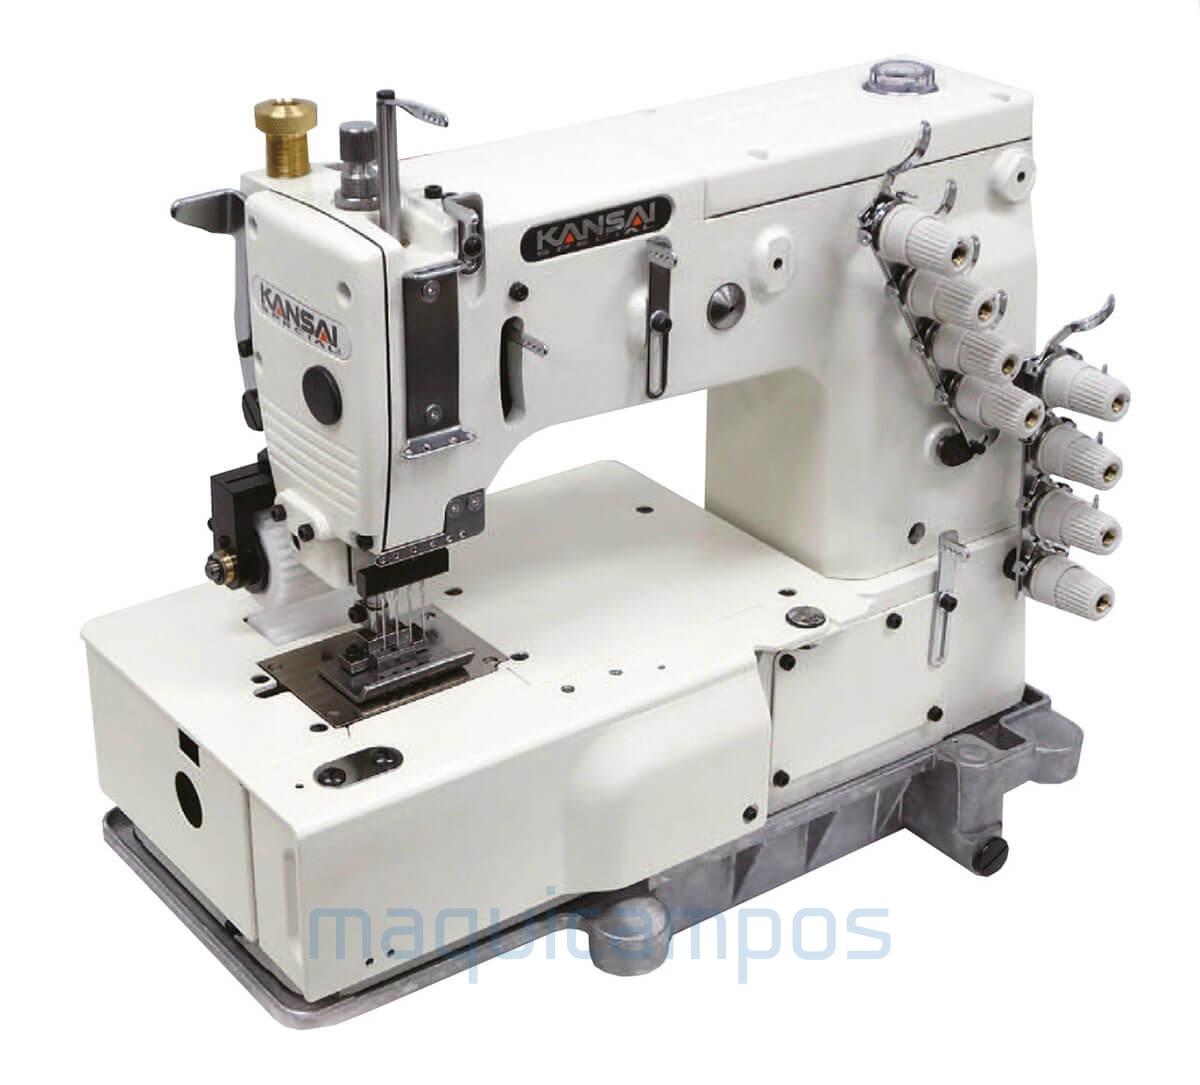 Kansai Special DFB1404PSF Multiple Needle Sewing Machine